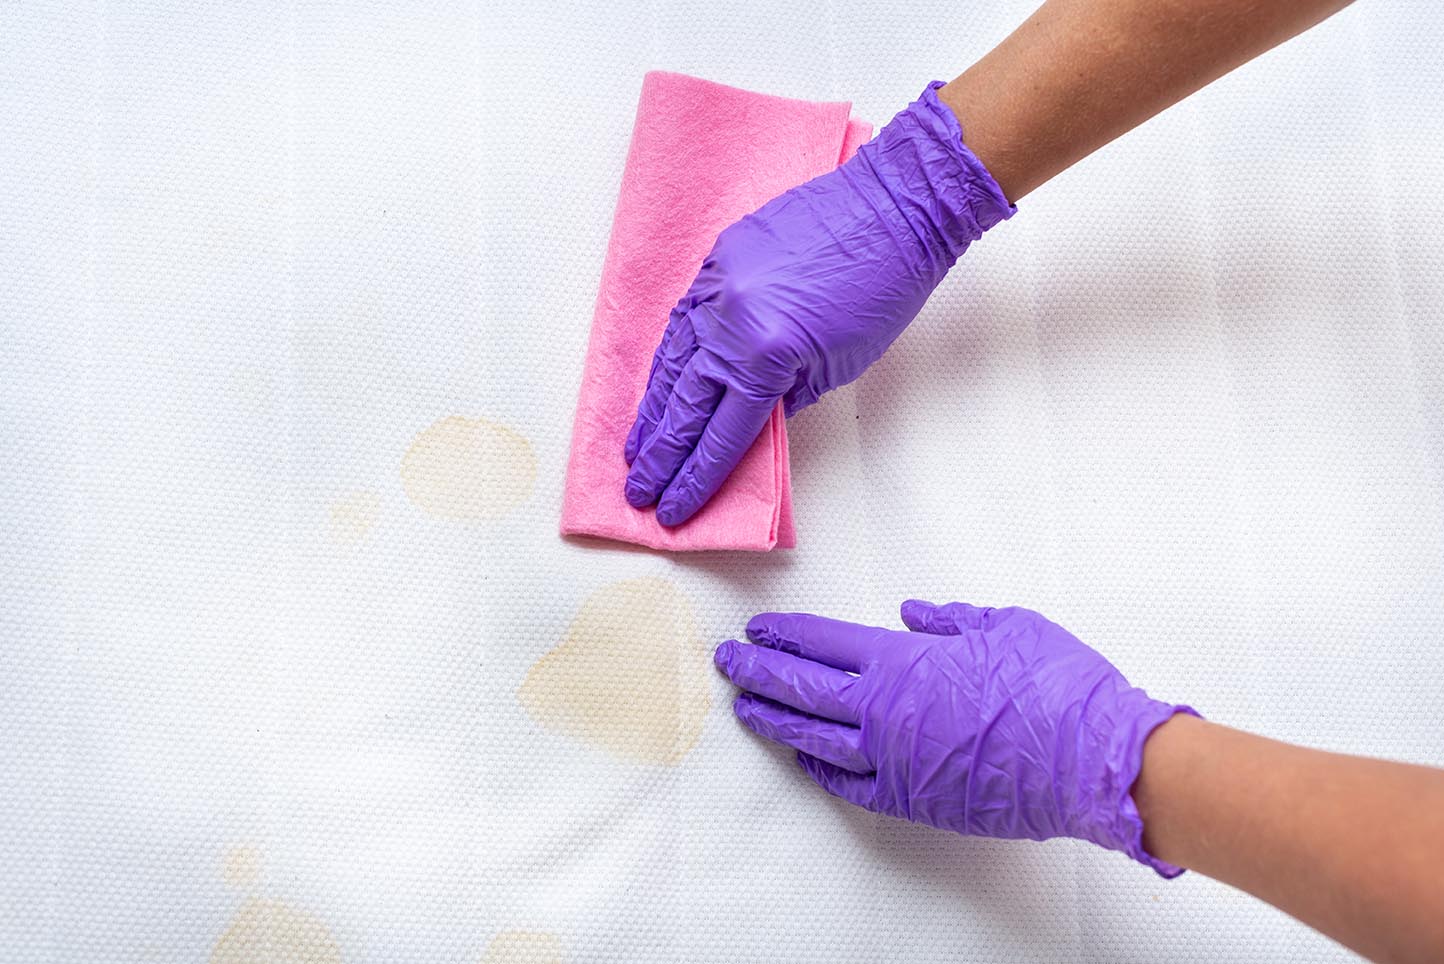 person removing dry stain in the mattress